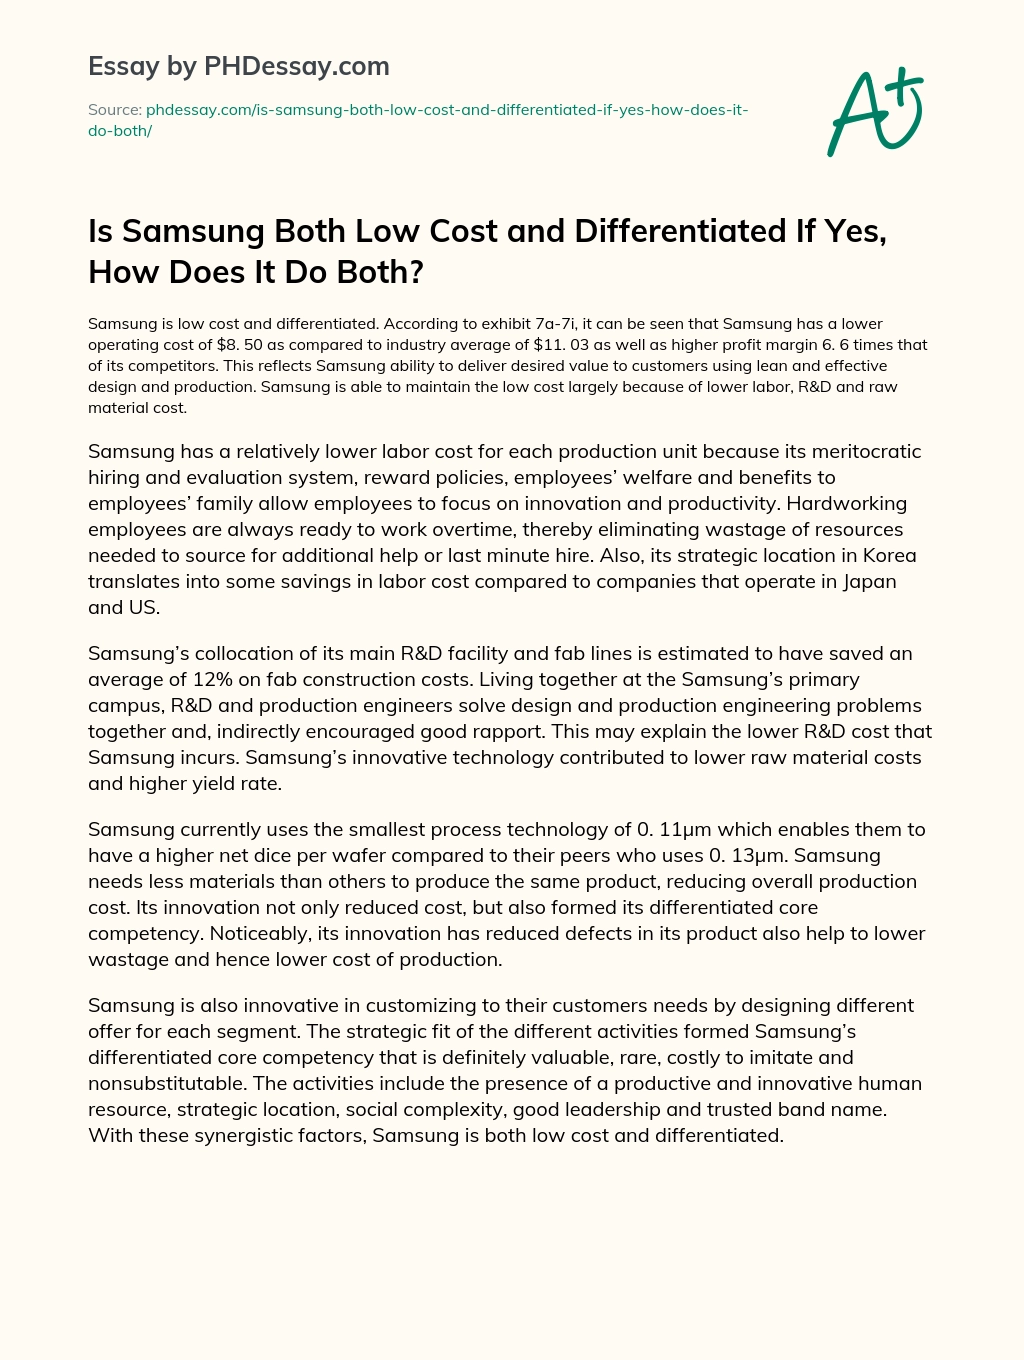 Is Samsung Both Low Cost and Differentiated If Yes, How Does It Do Both? essay